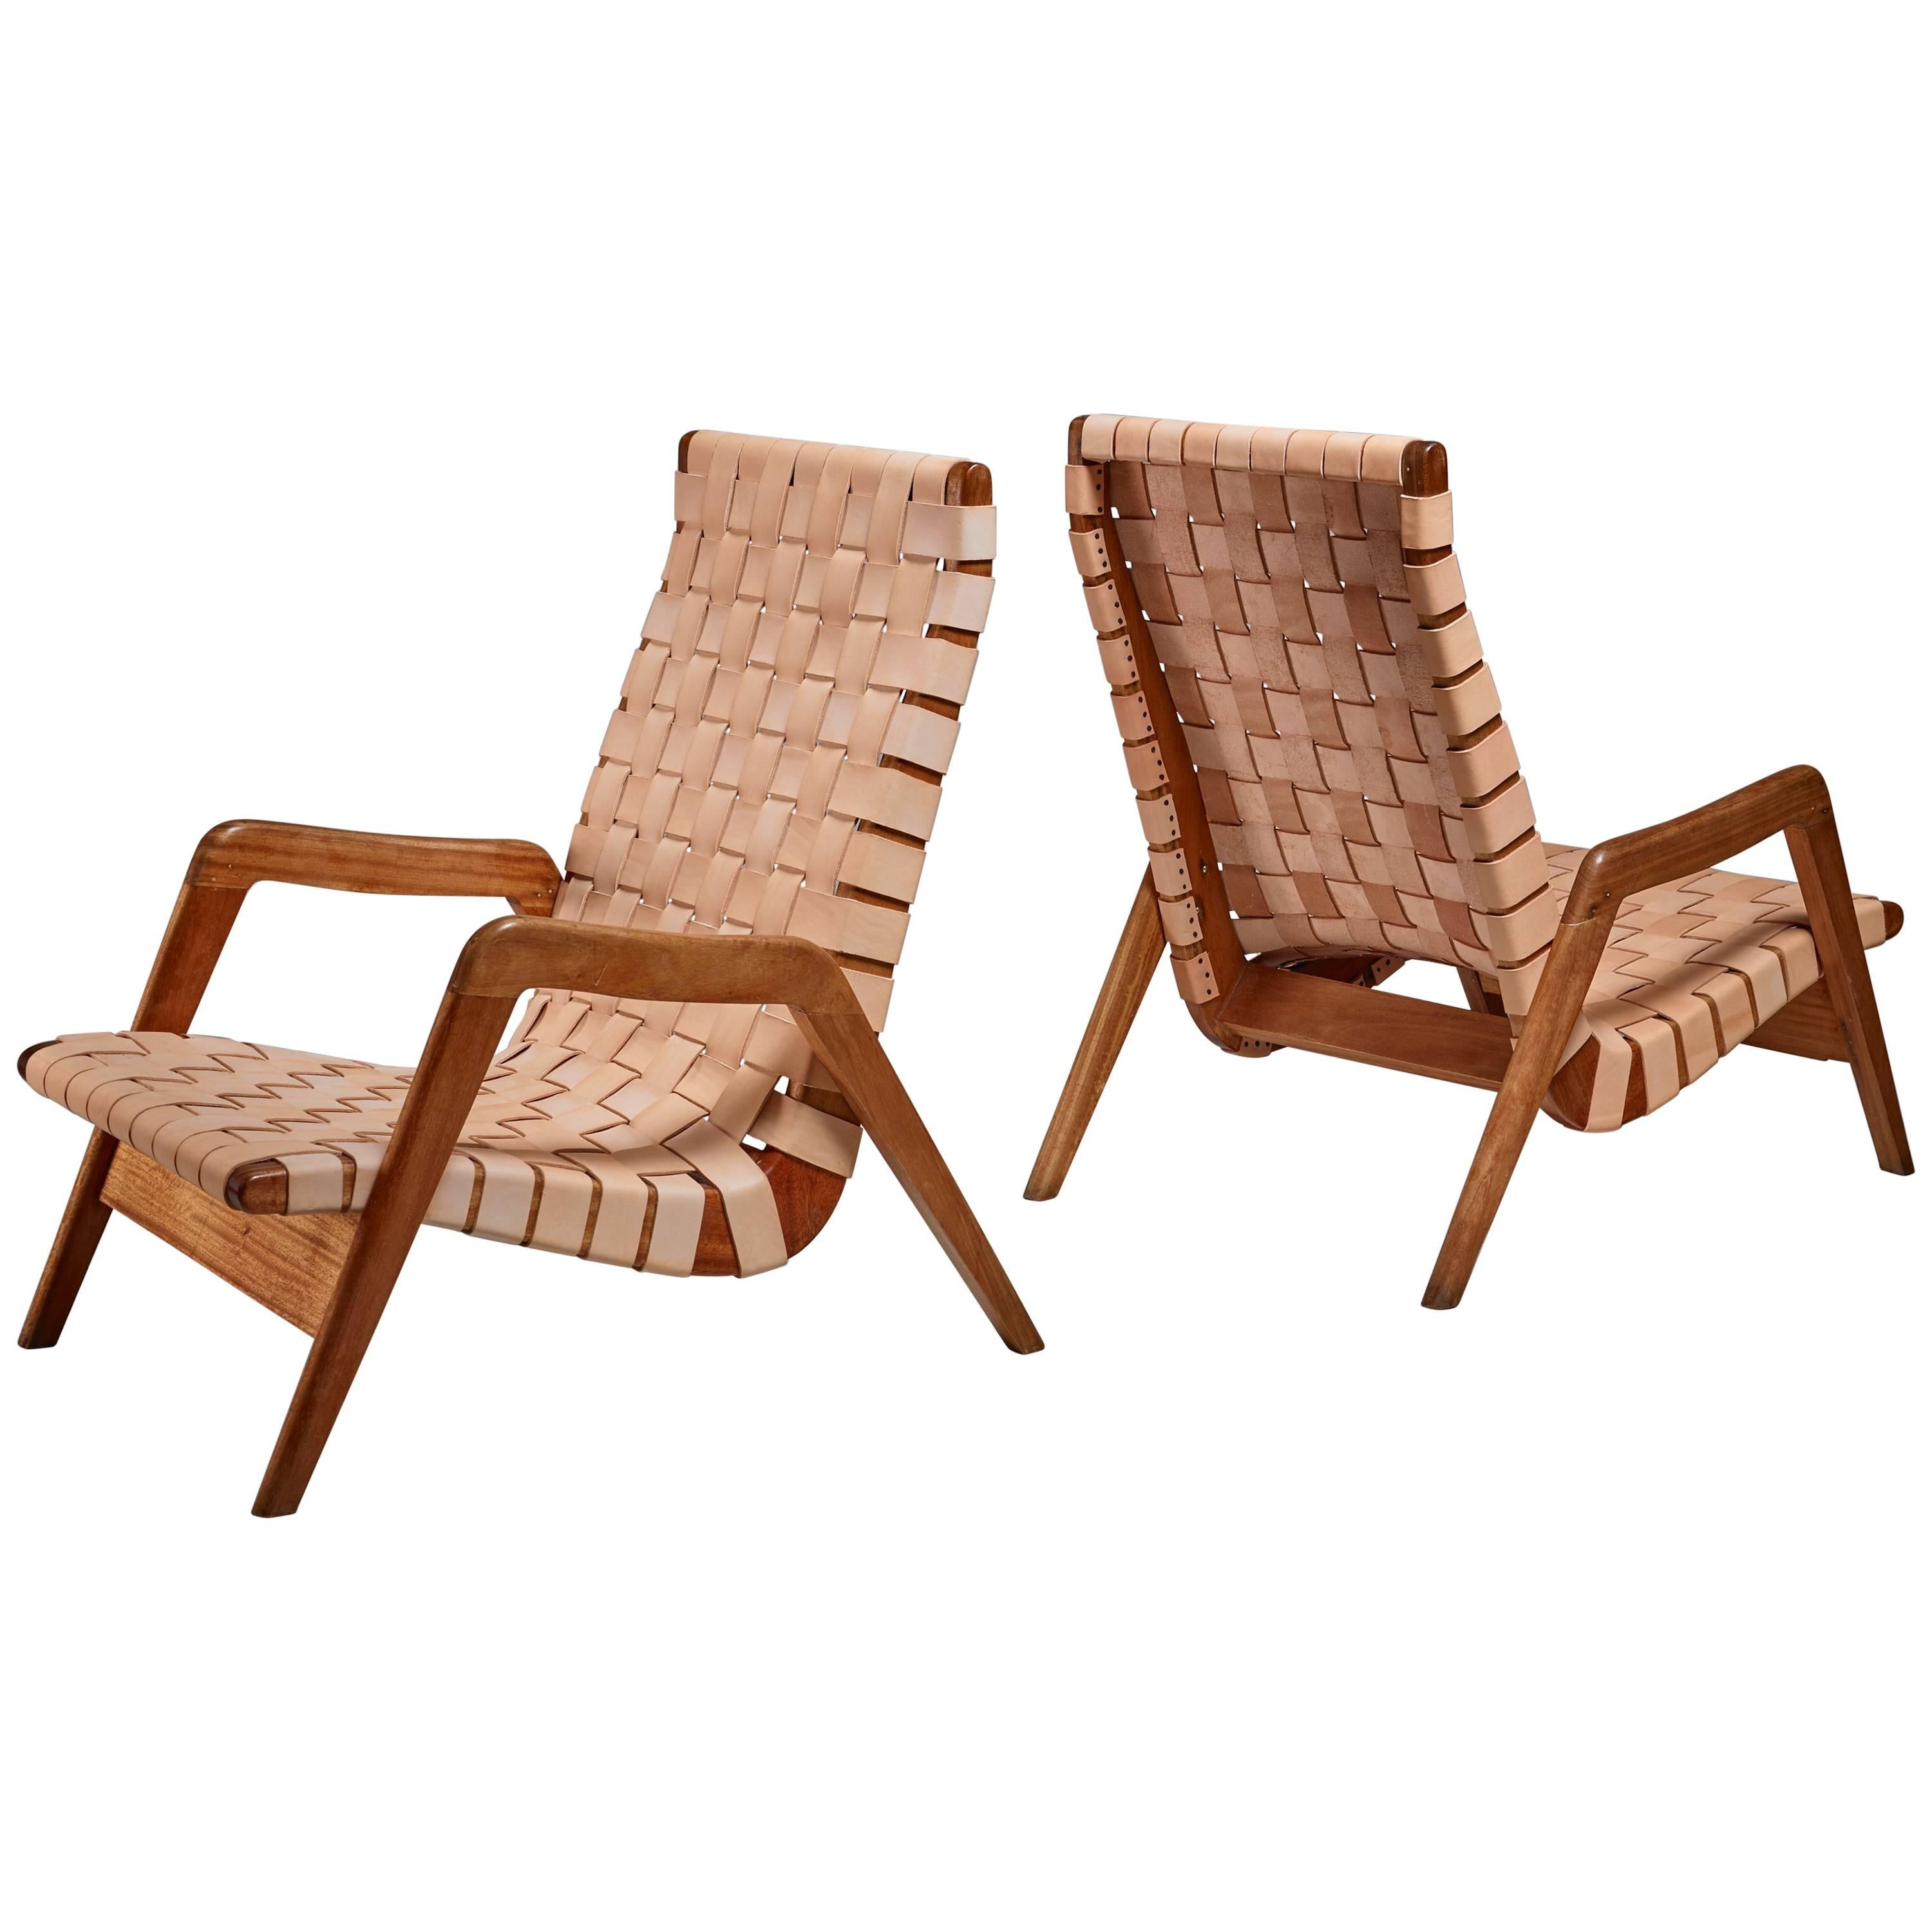 Pair of Mexican Lounge Chairs with Leather Webbing, 1950s For Sale